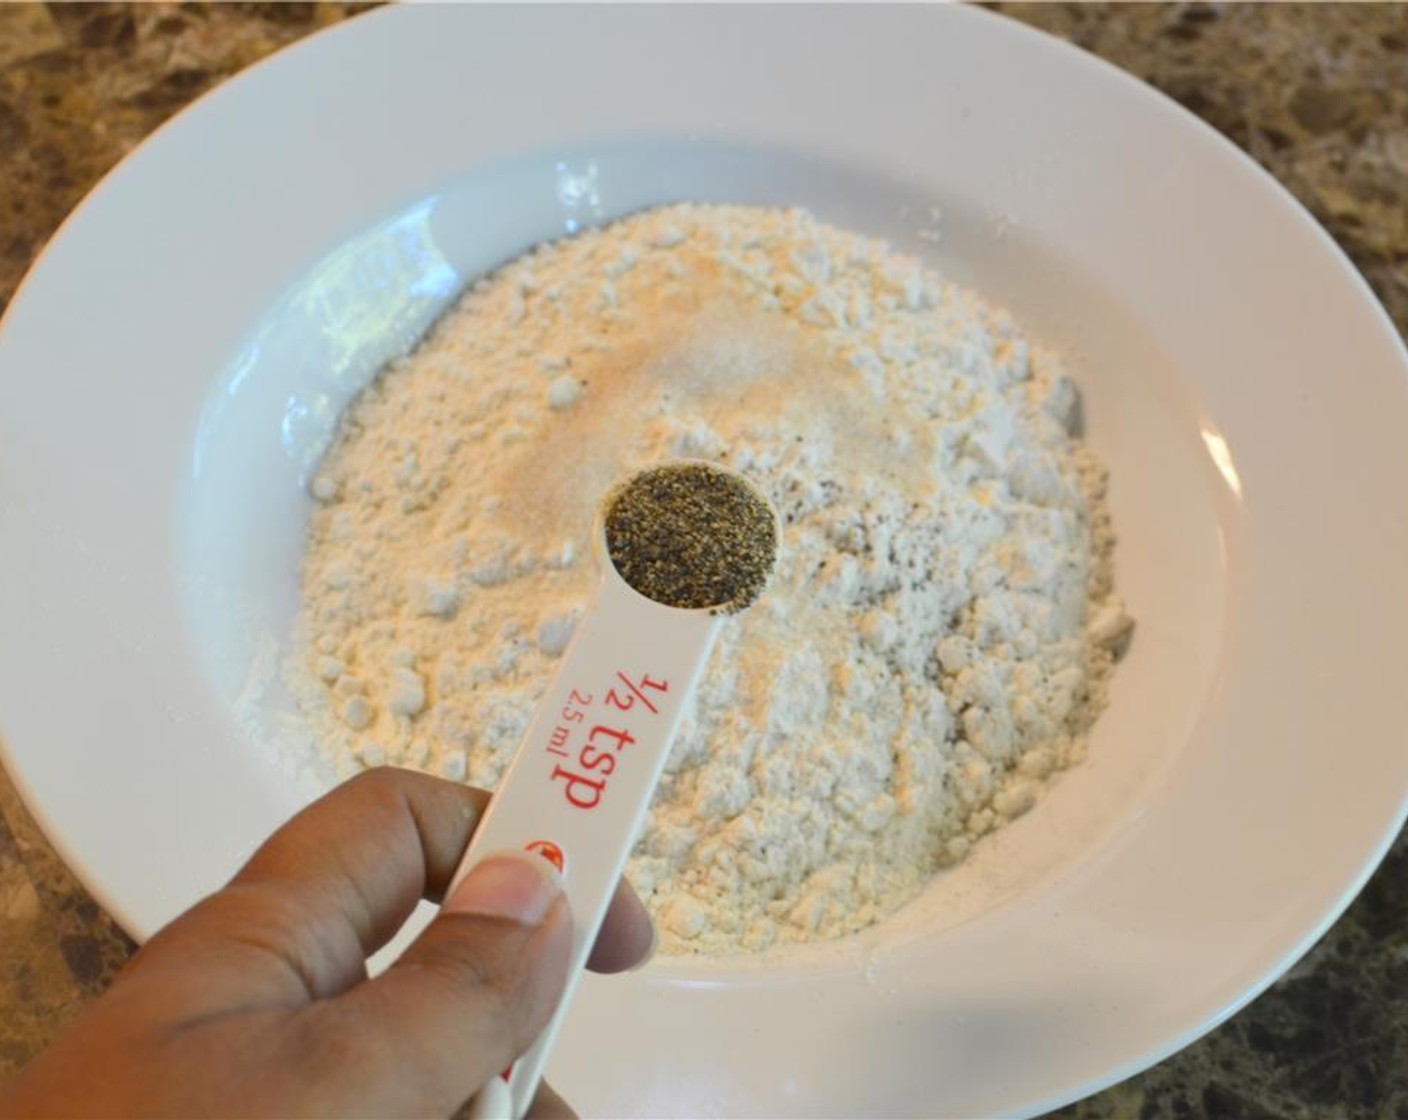 step 4 In another shallow bowl, mix together All-Purpose Flour (1 cup), the remaining Garlic Salt (1 tsp) and Freshly Ground Black Pepper (1/2 tsp).